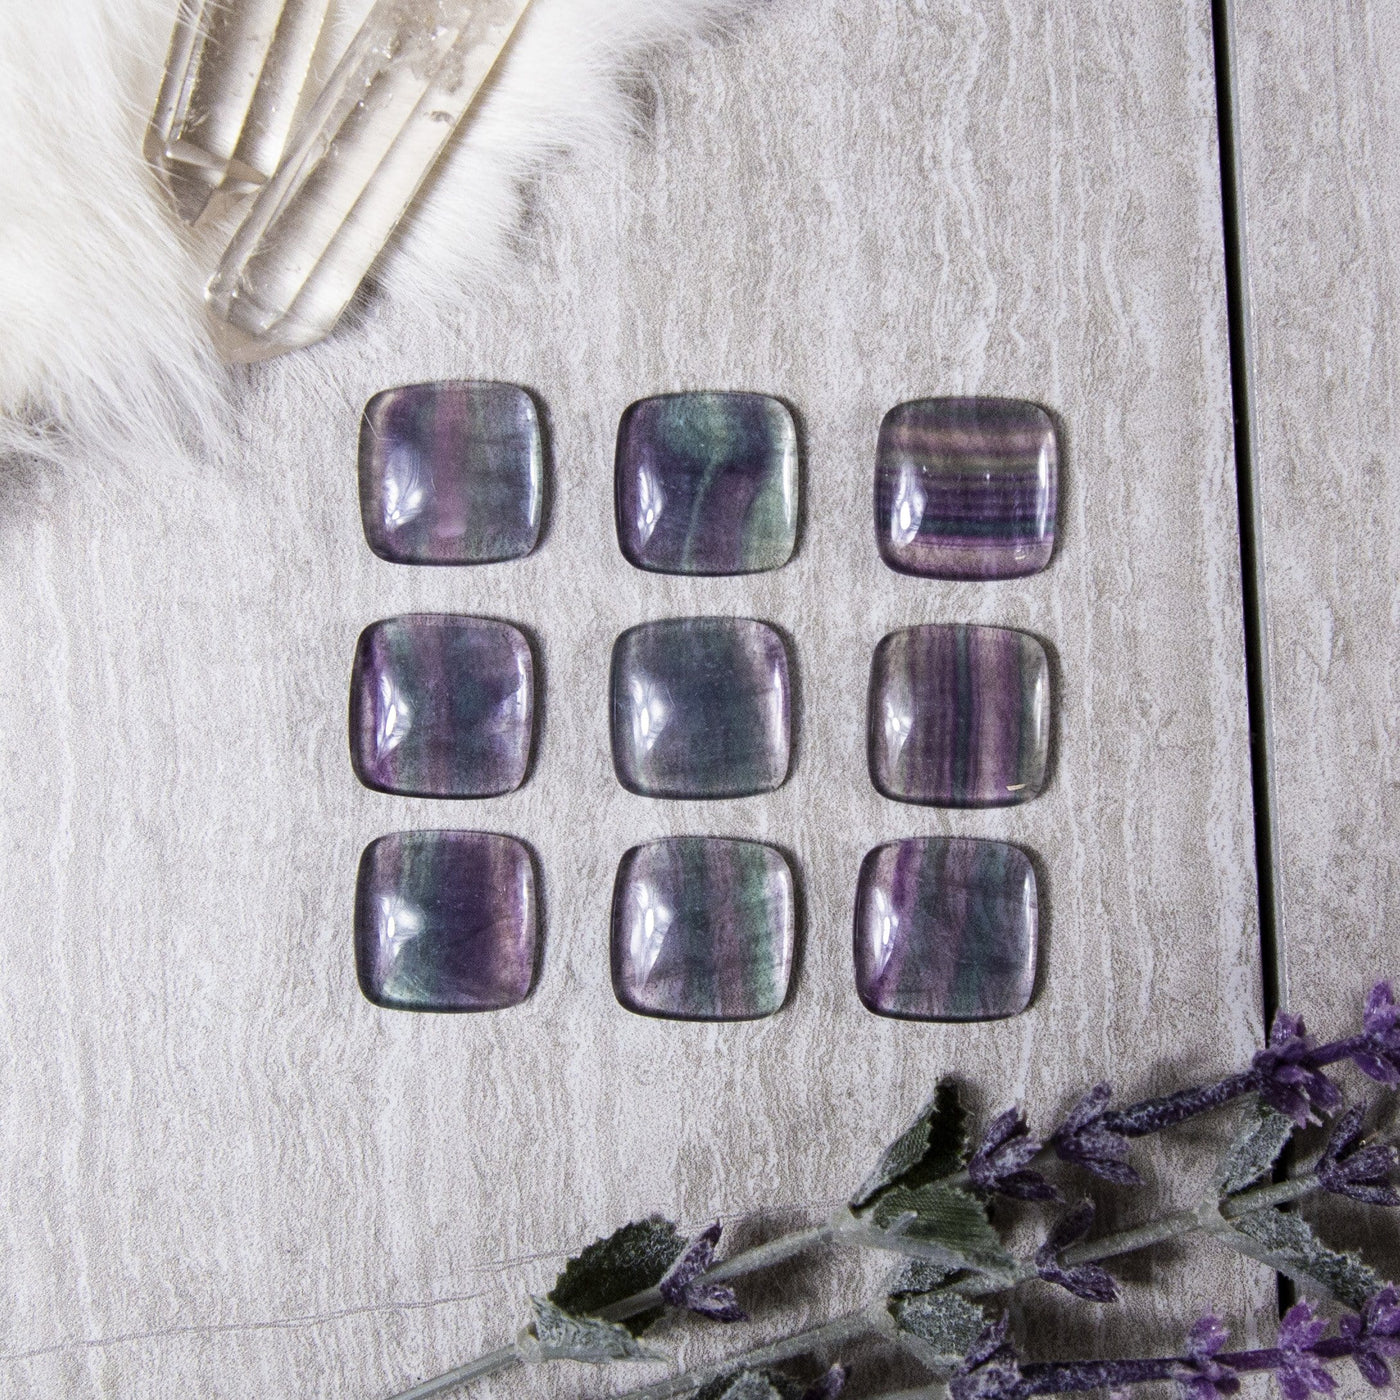 Rainbow Fluorite Square Cabochons displayed on gray background to show various patterns and colors